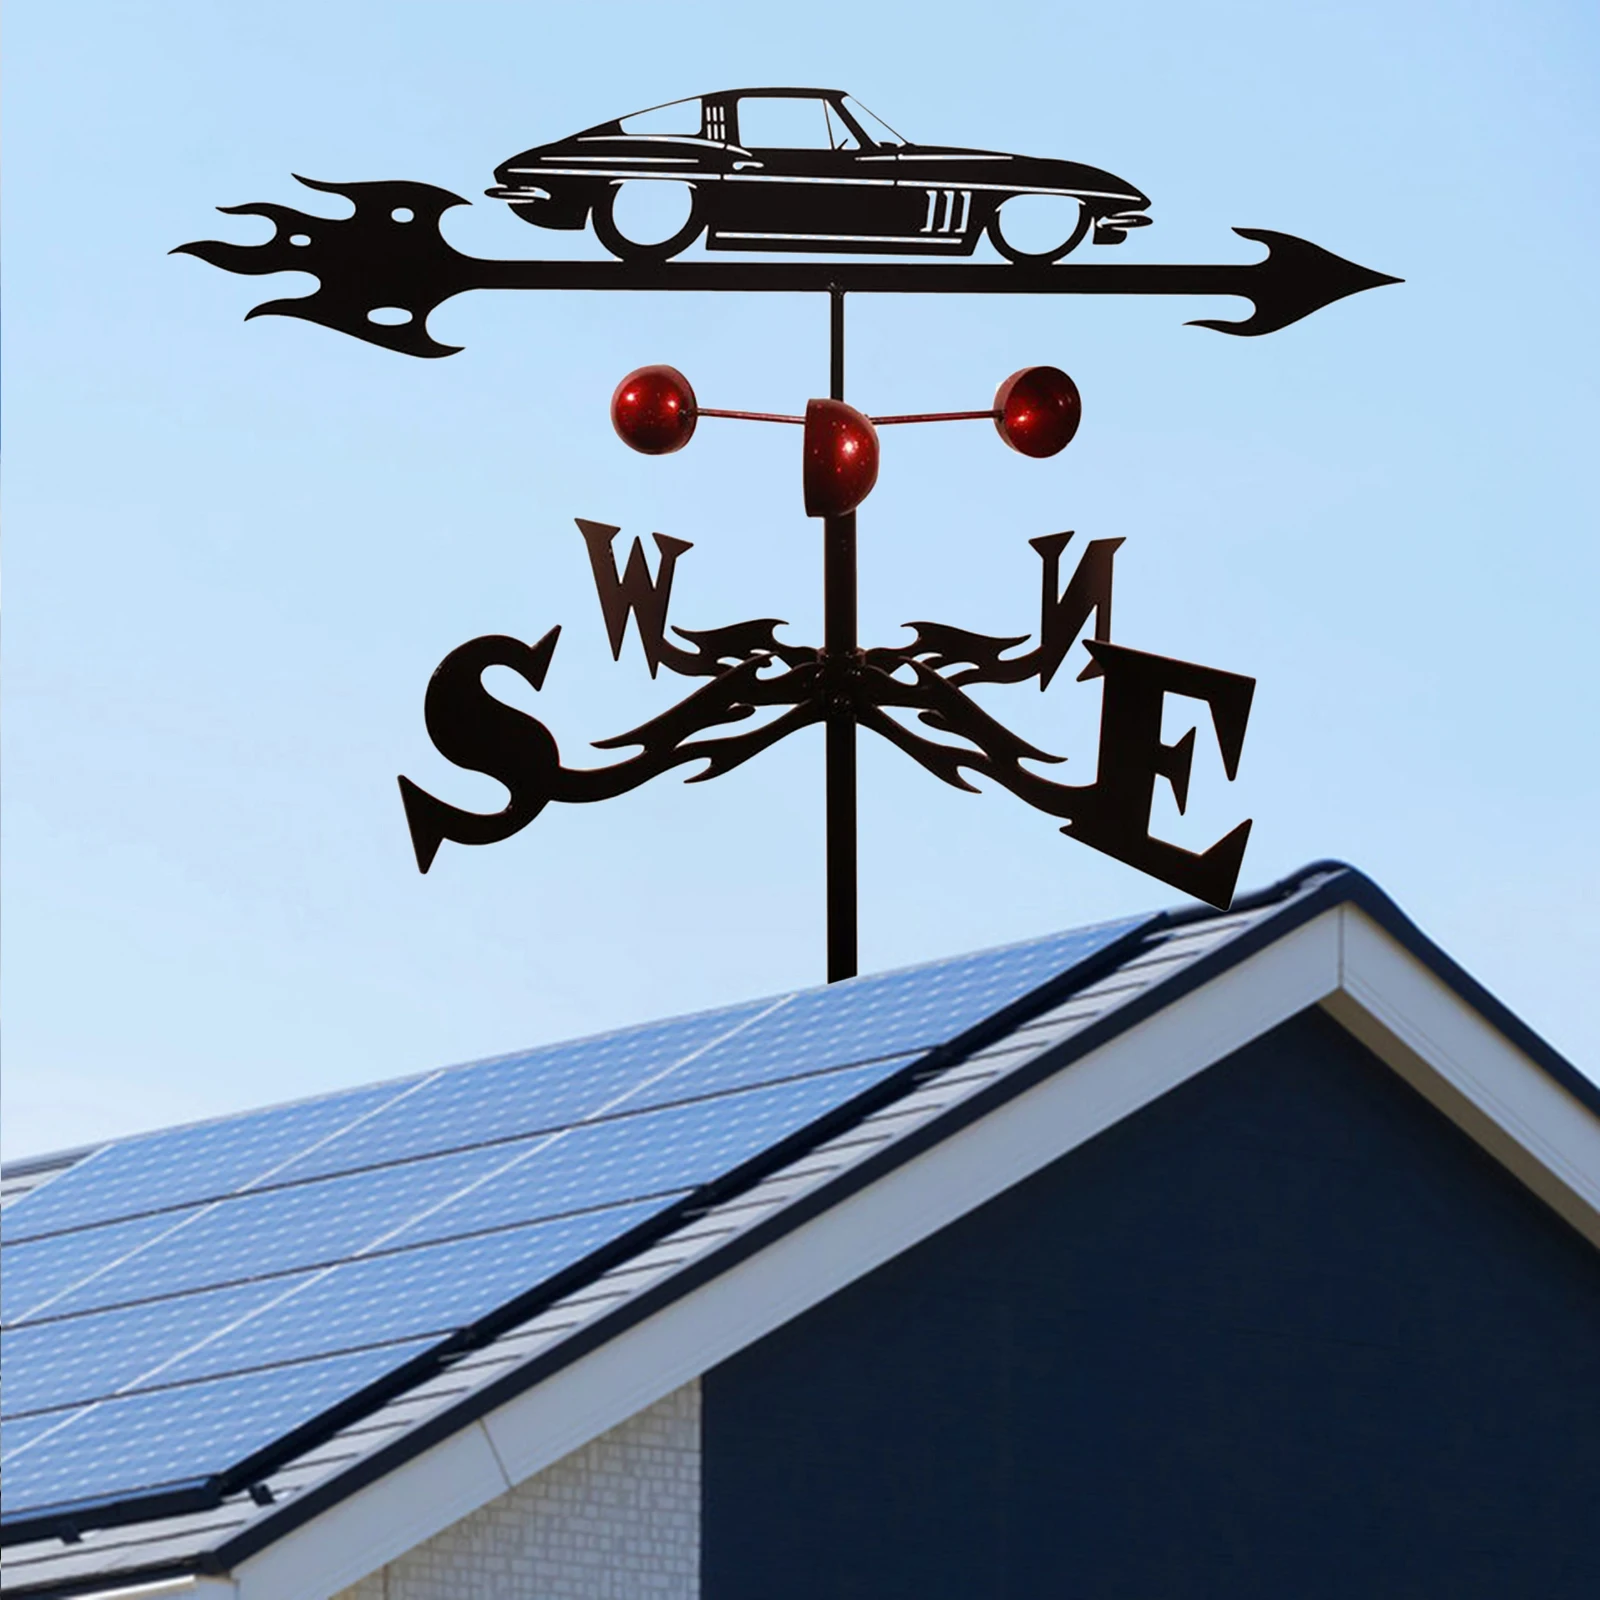 Auink Metal Animal Weathervane Stainless Steel Weather Wind Vane Direction Indicator for Garden Decoration Gift for Home 